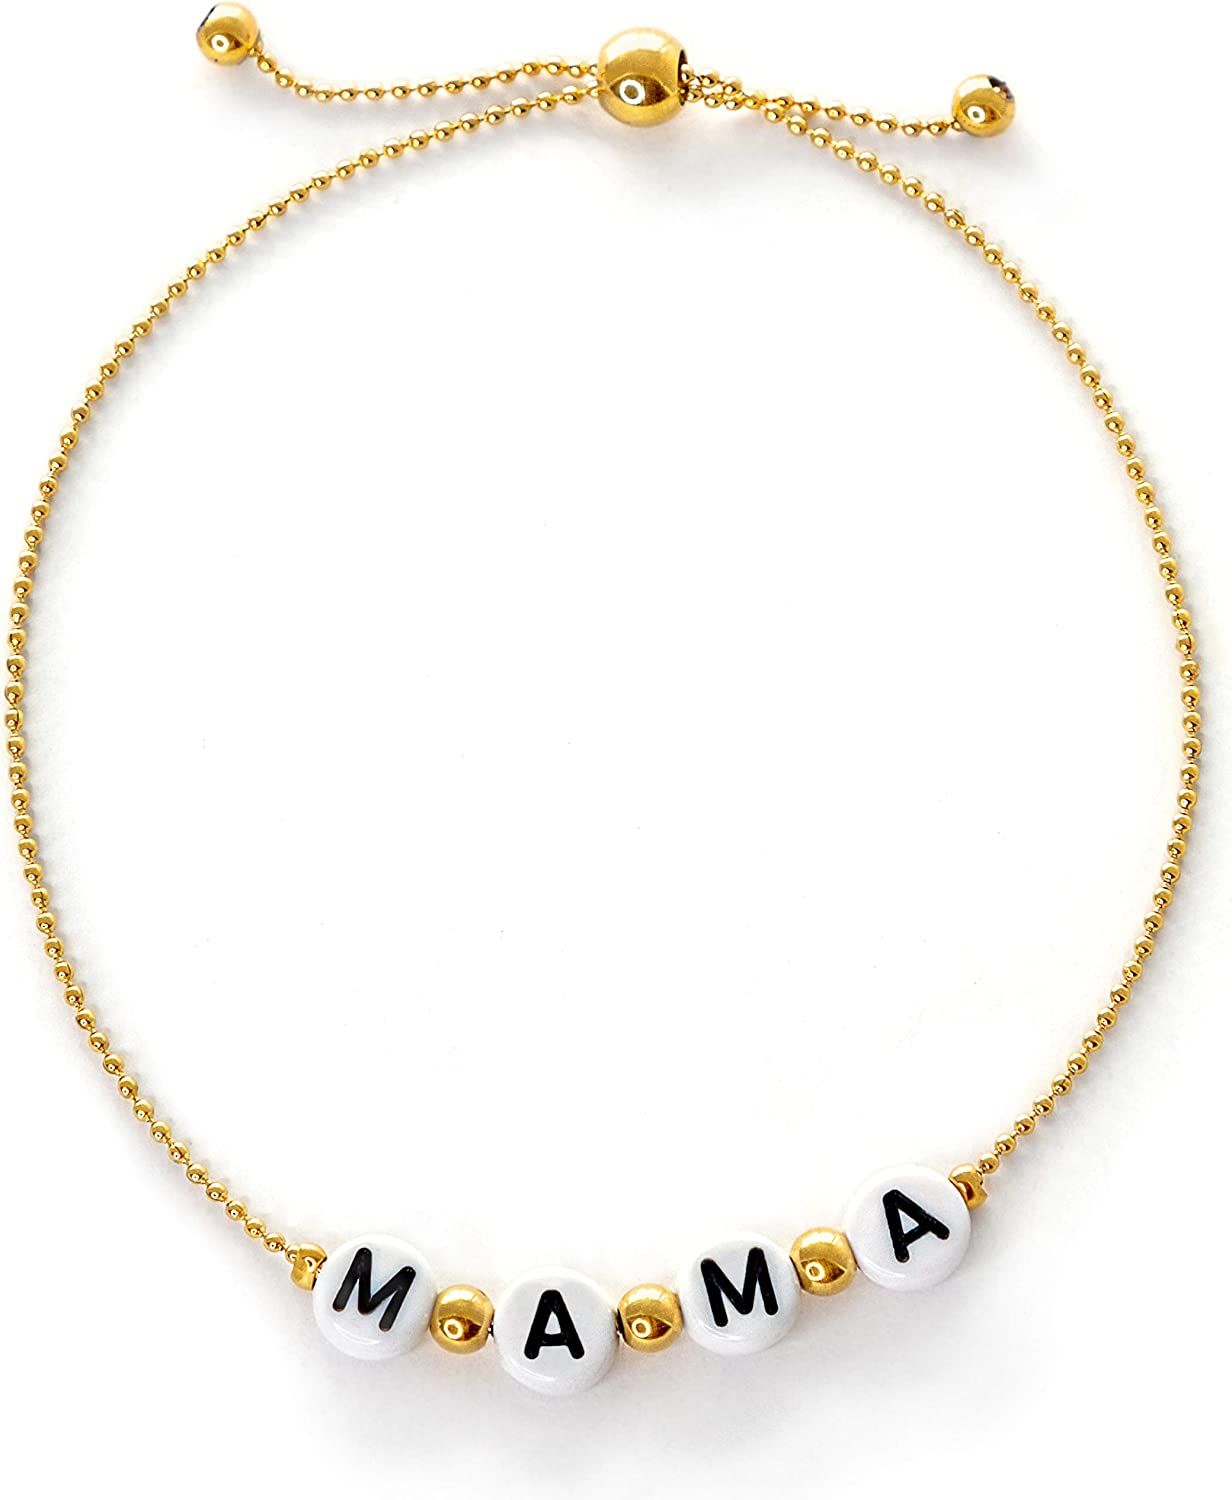 Mama Bracelet, Mom Jewelry, Mama Bracelets for Women | Christmas Gifts for Mom from Daughter, Son... | Amazon (US)